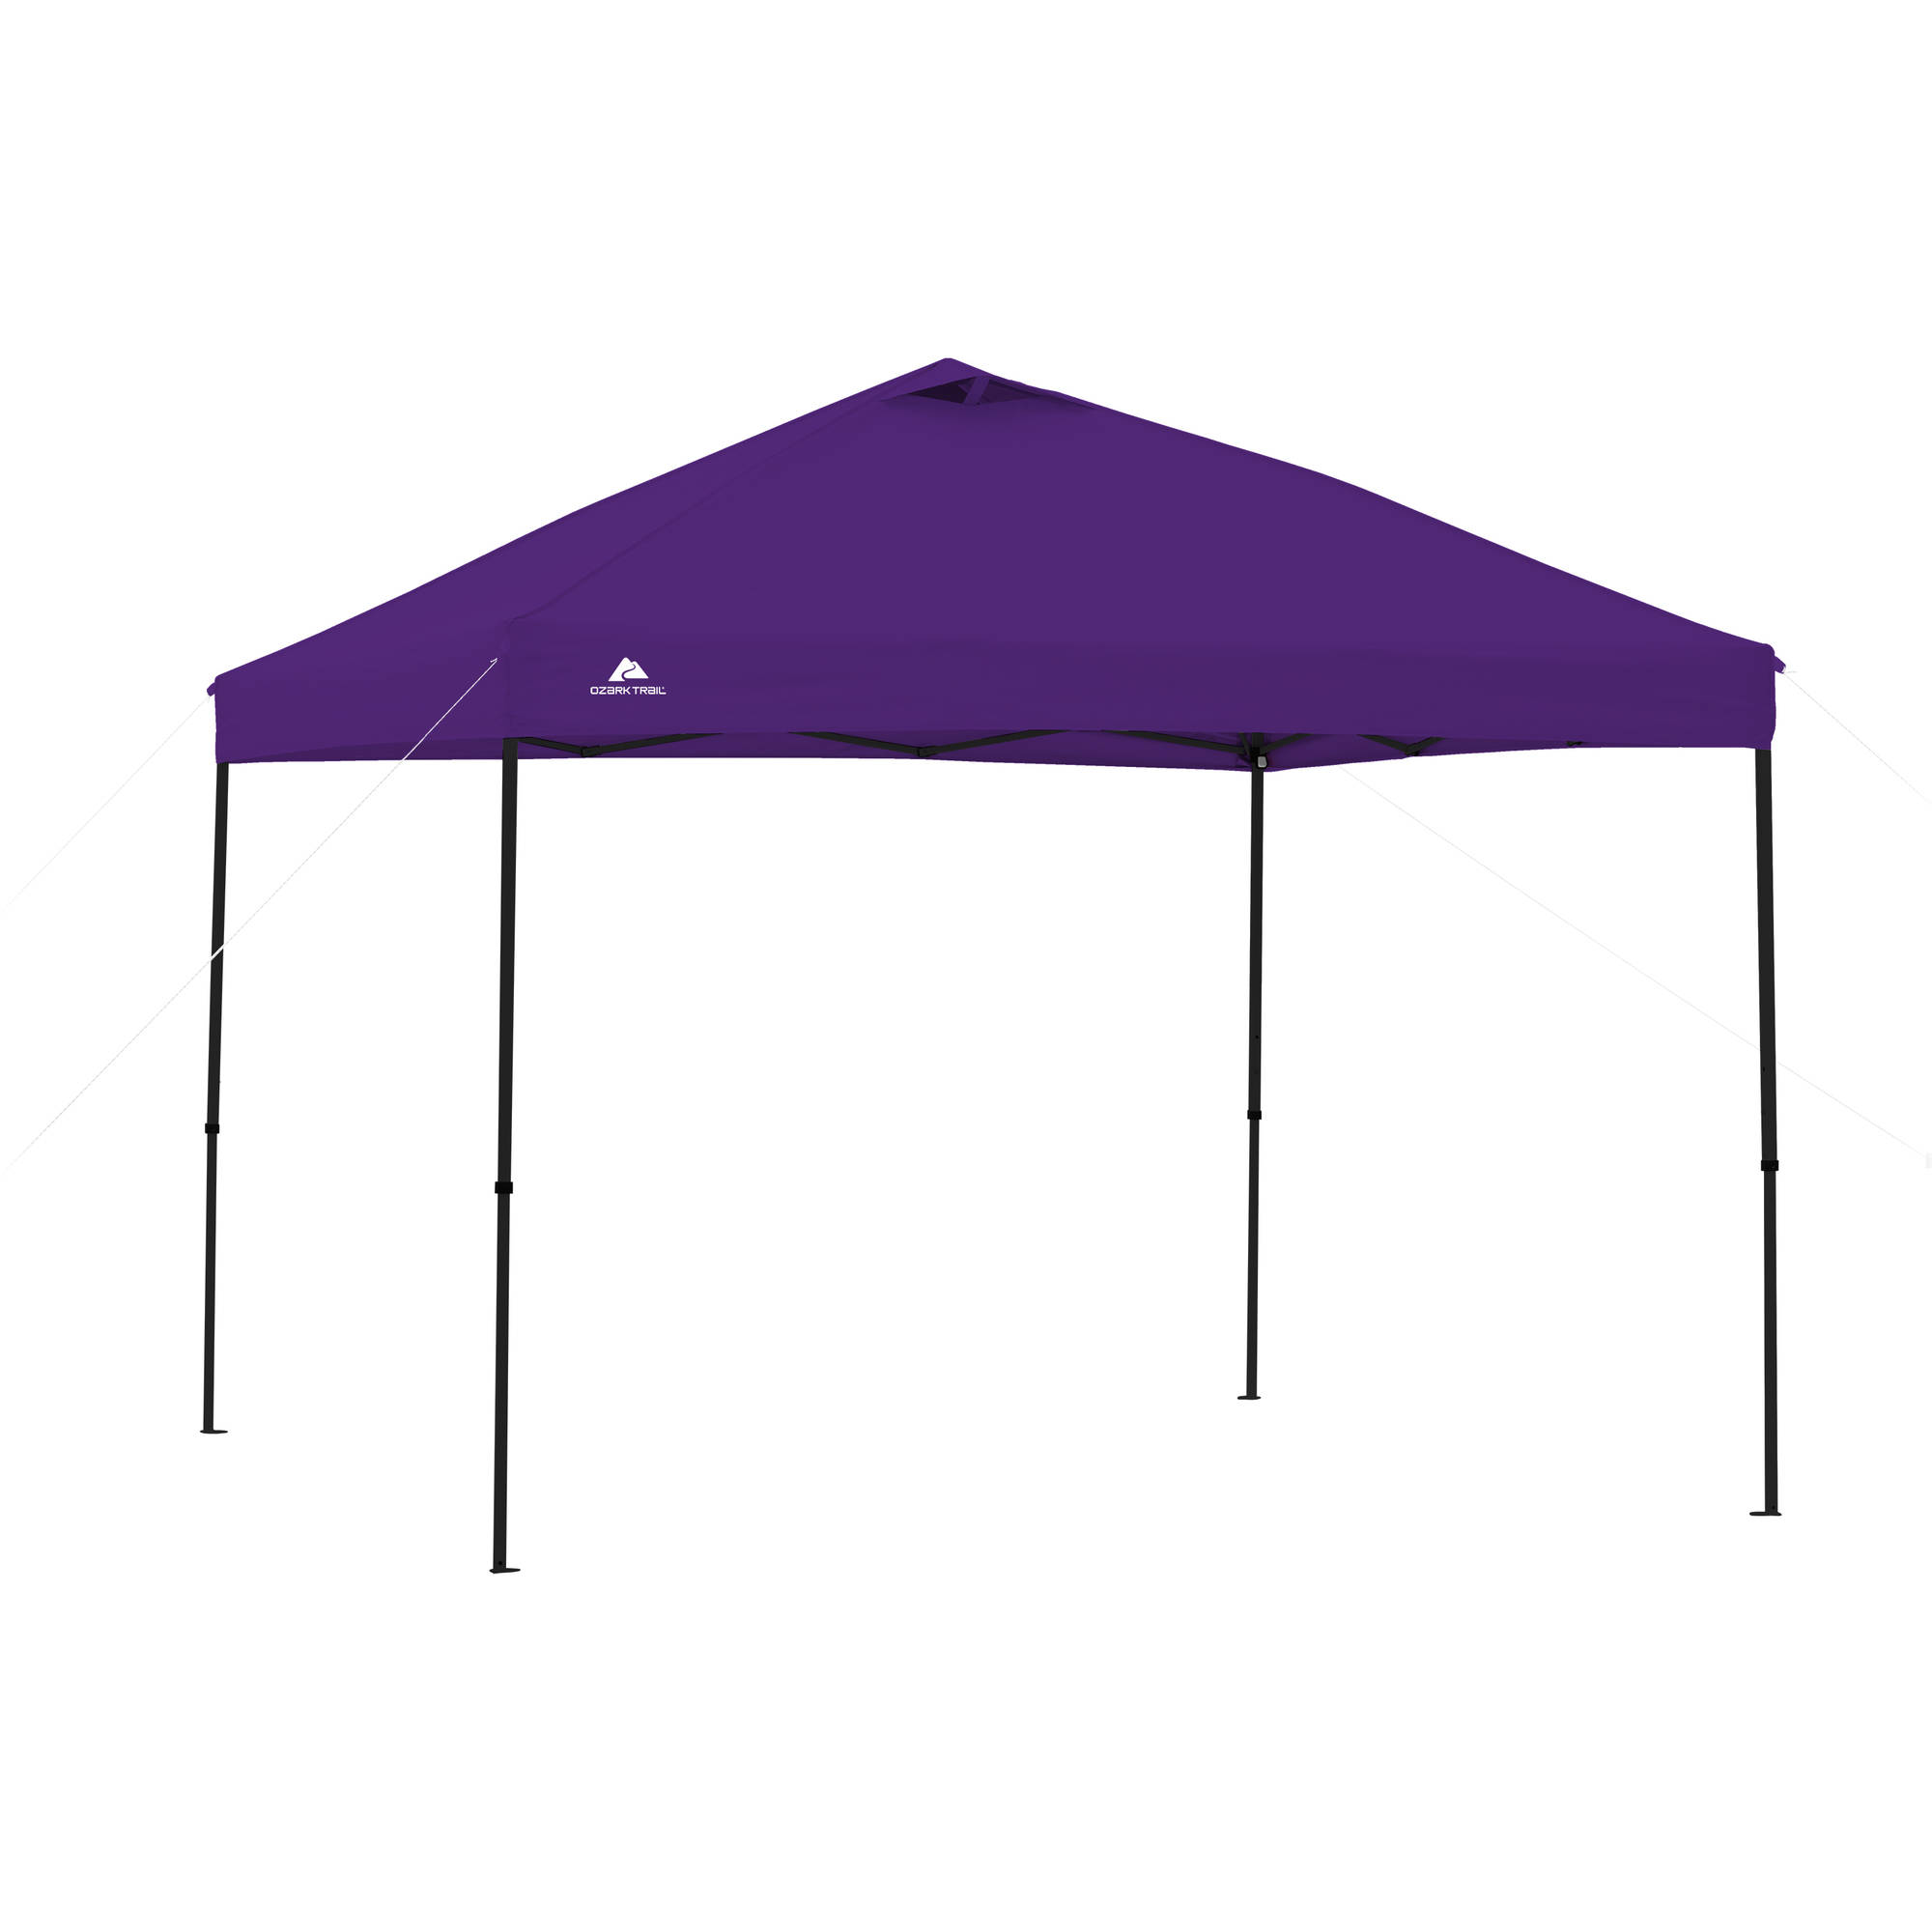 Ozark Trail 10' x 10' Purple Instant Outdoor Canopy with Heavy Duty Construction - image 1 of 6